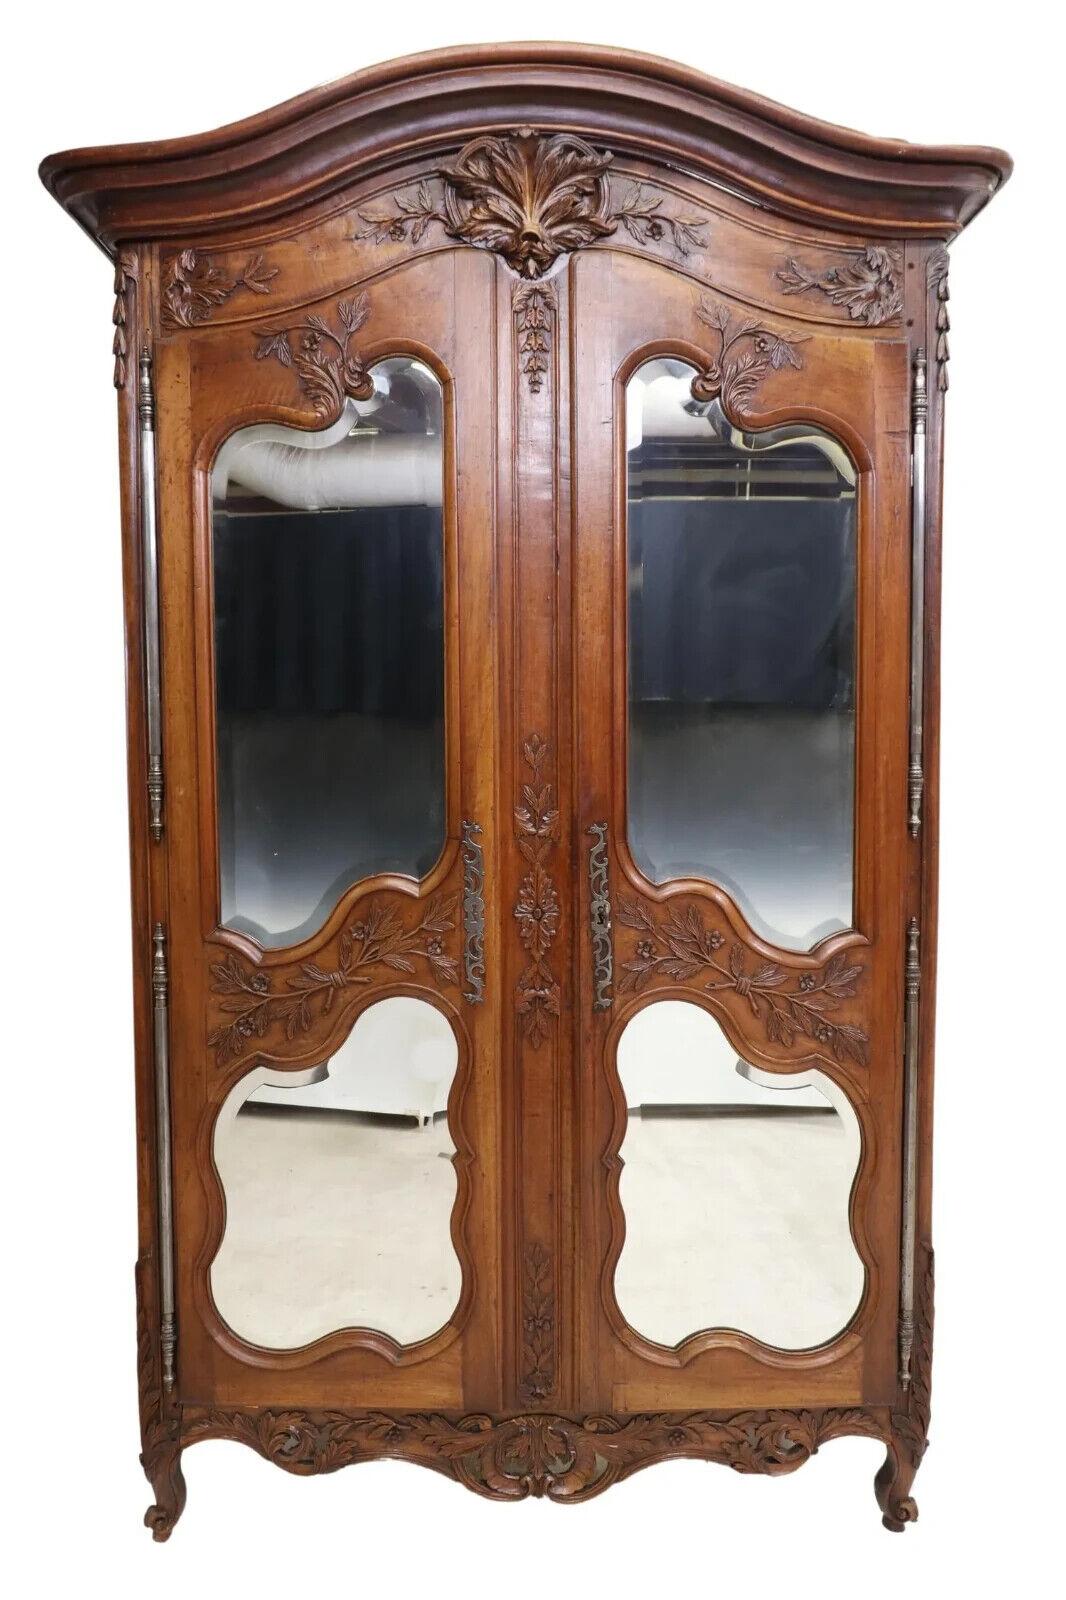 Gorgeous Antique Armoire, Large French Provincial, Walnut, Mirrored, Shelves, Early 19th Century, 1800s!!

Fine French Provincial Louis XV style walnut armoire, early 20th c., having shaped cornice, carved fanned crest, over two doors fitted with